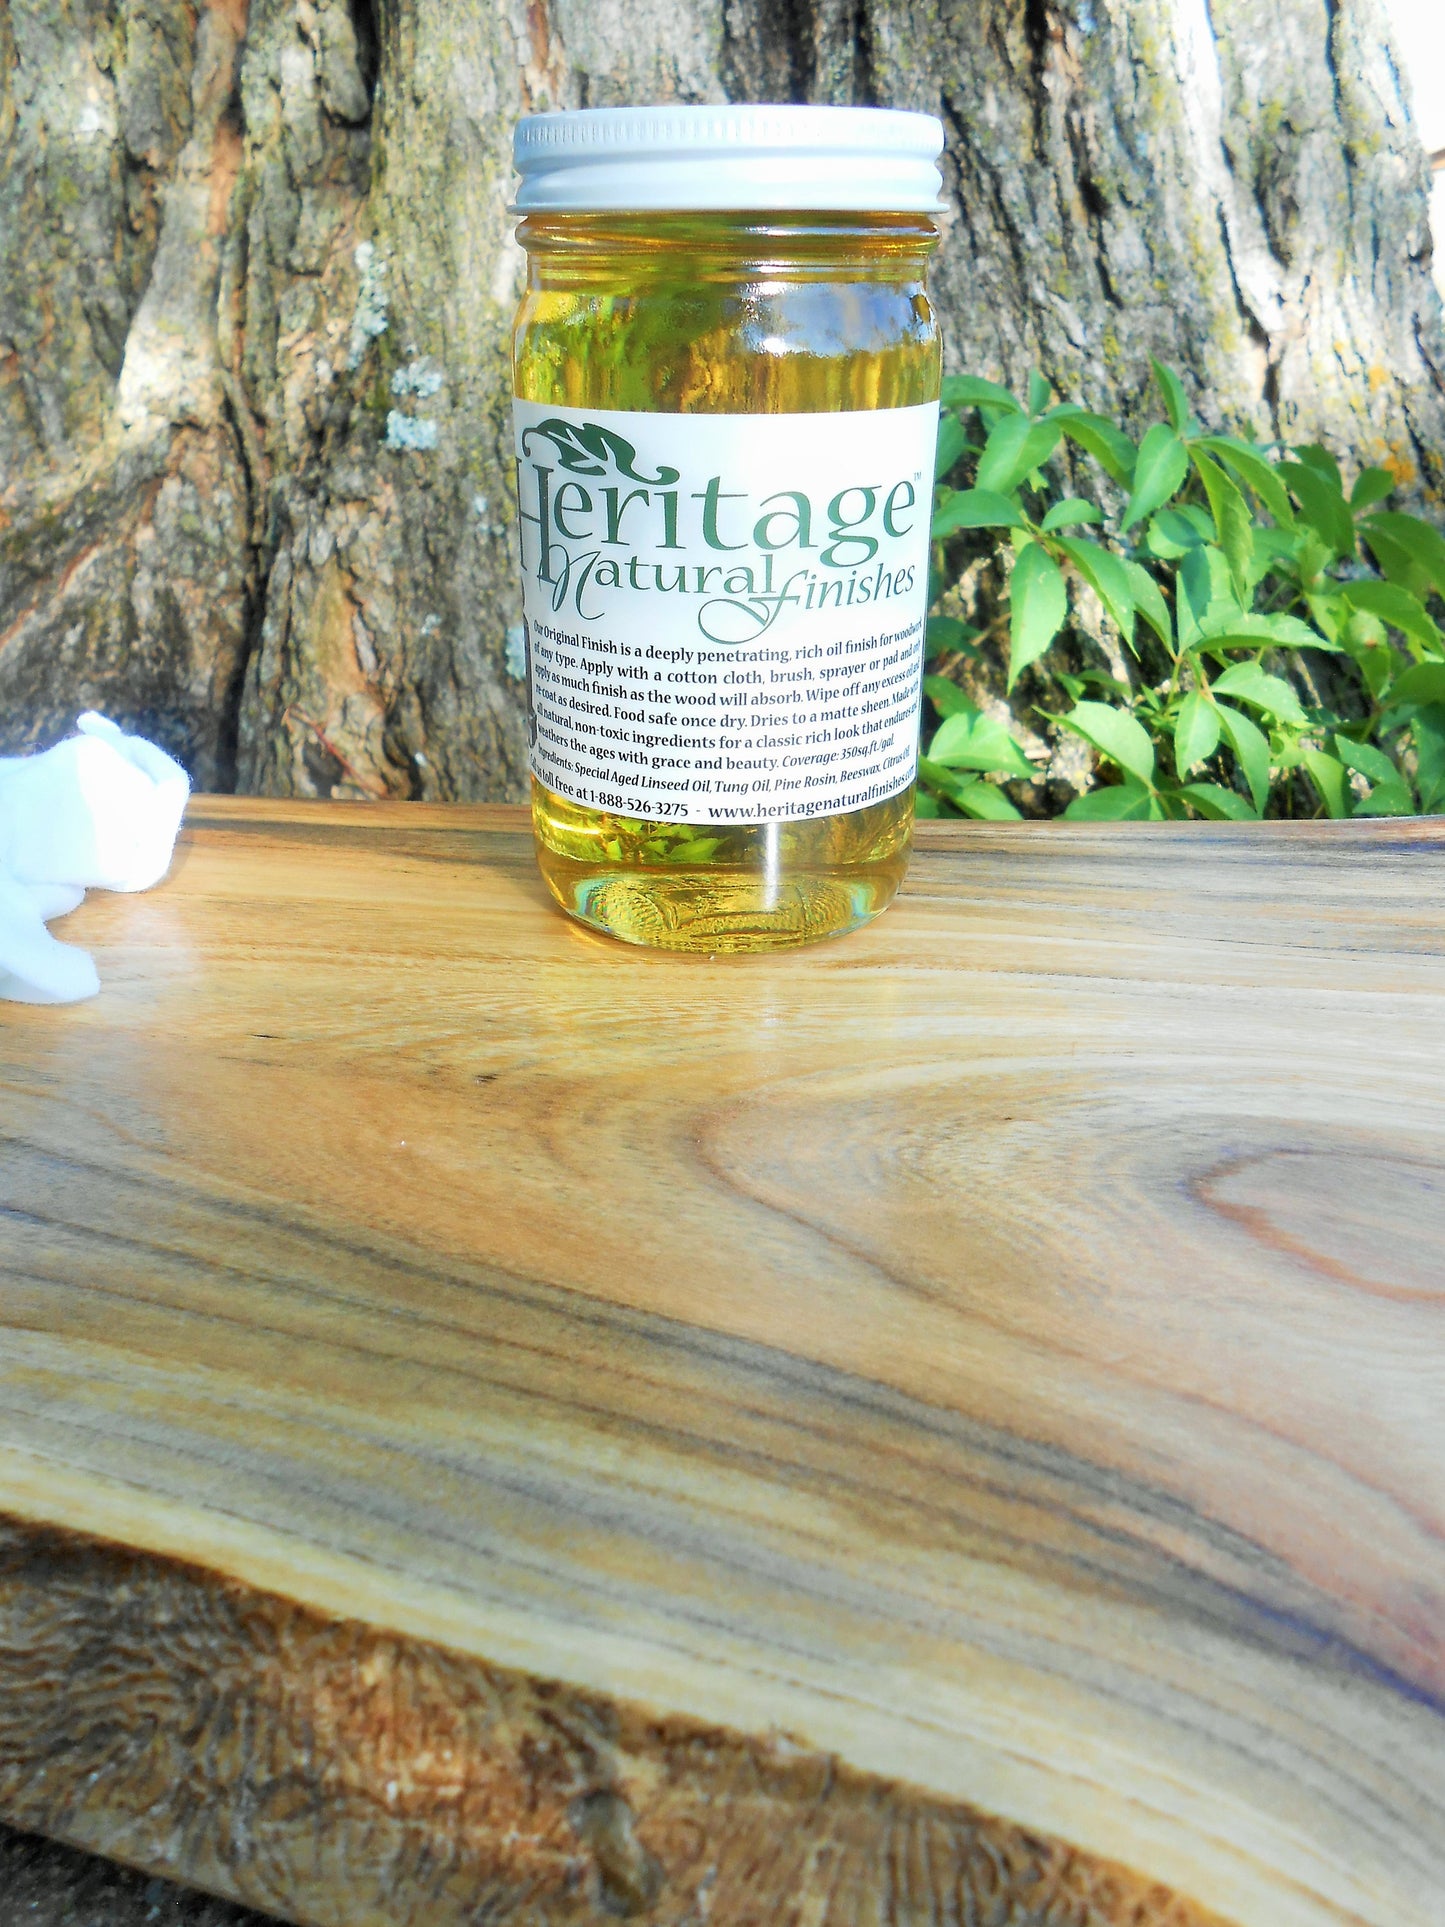 Heritage Natural Finishes - Natural Penetrating Oil